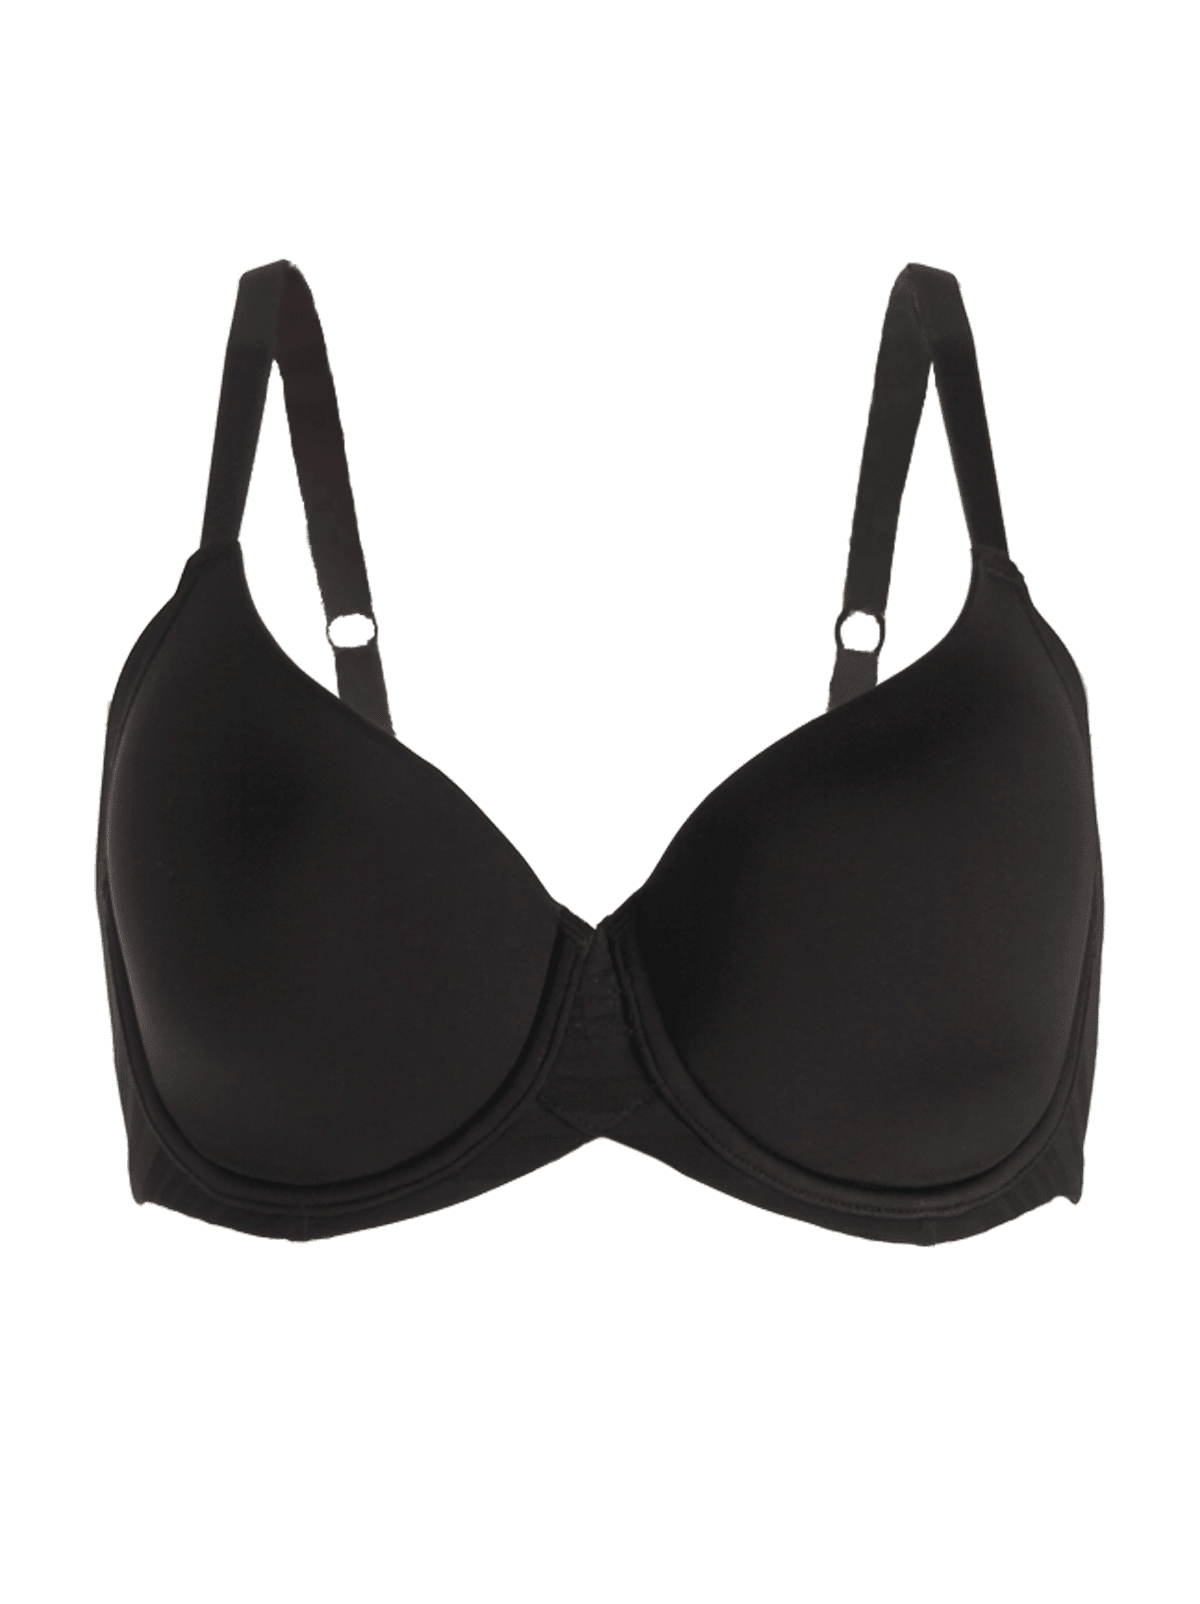 Paramour Women's Marvelous Side Smoother Seamless Bra - Black 34dd : Target